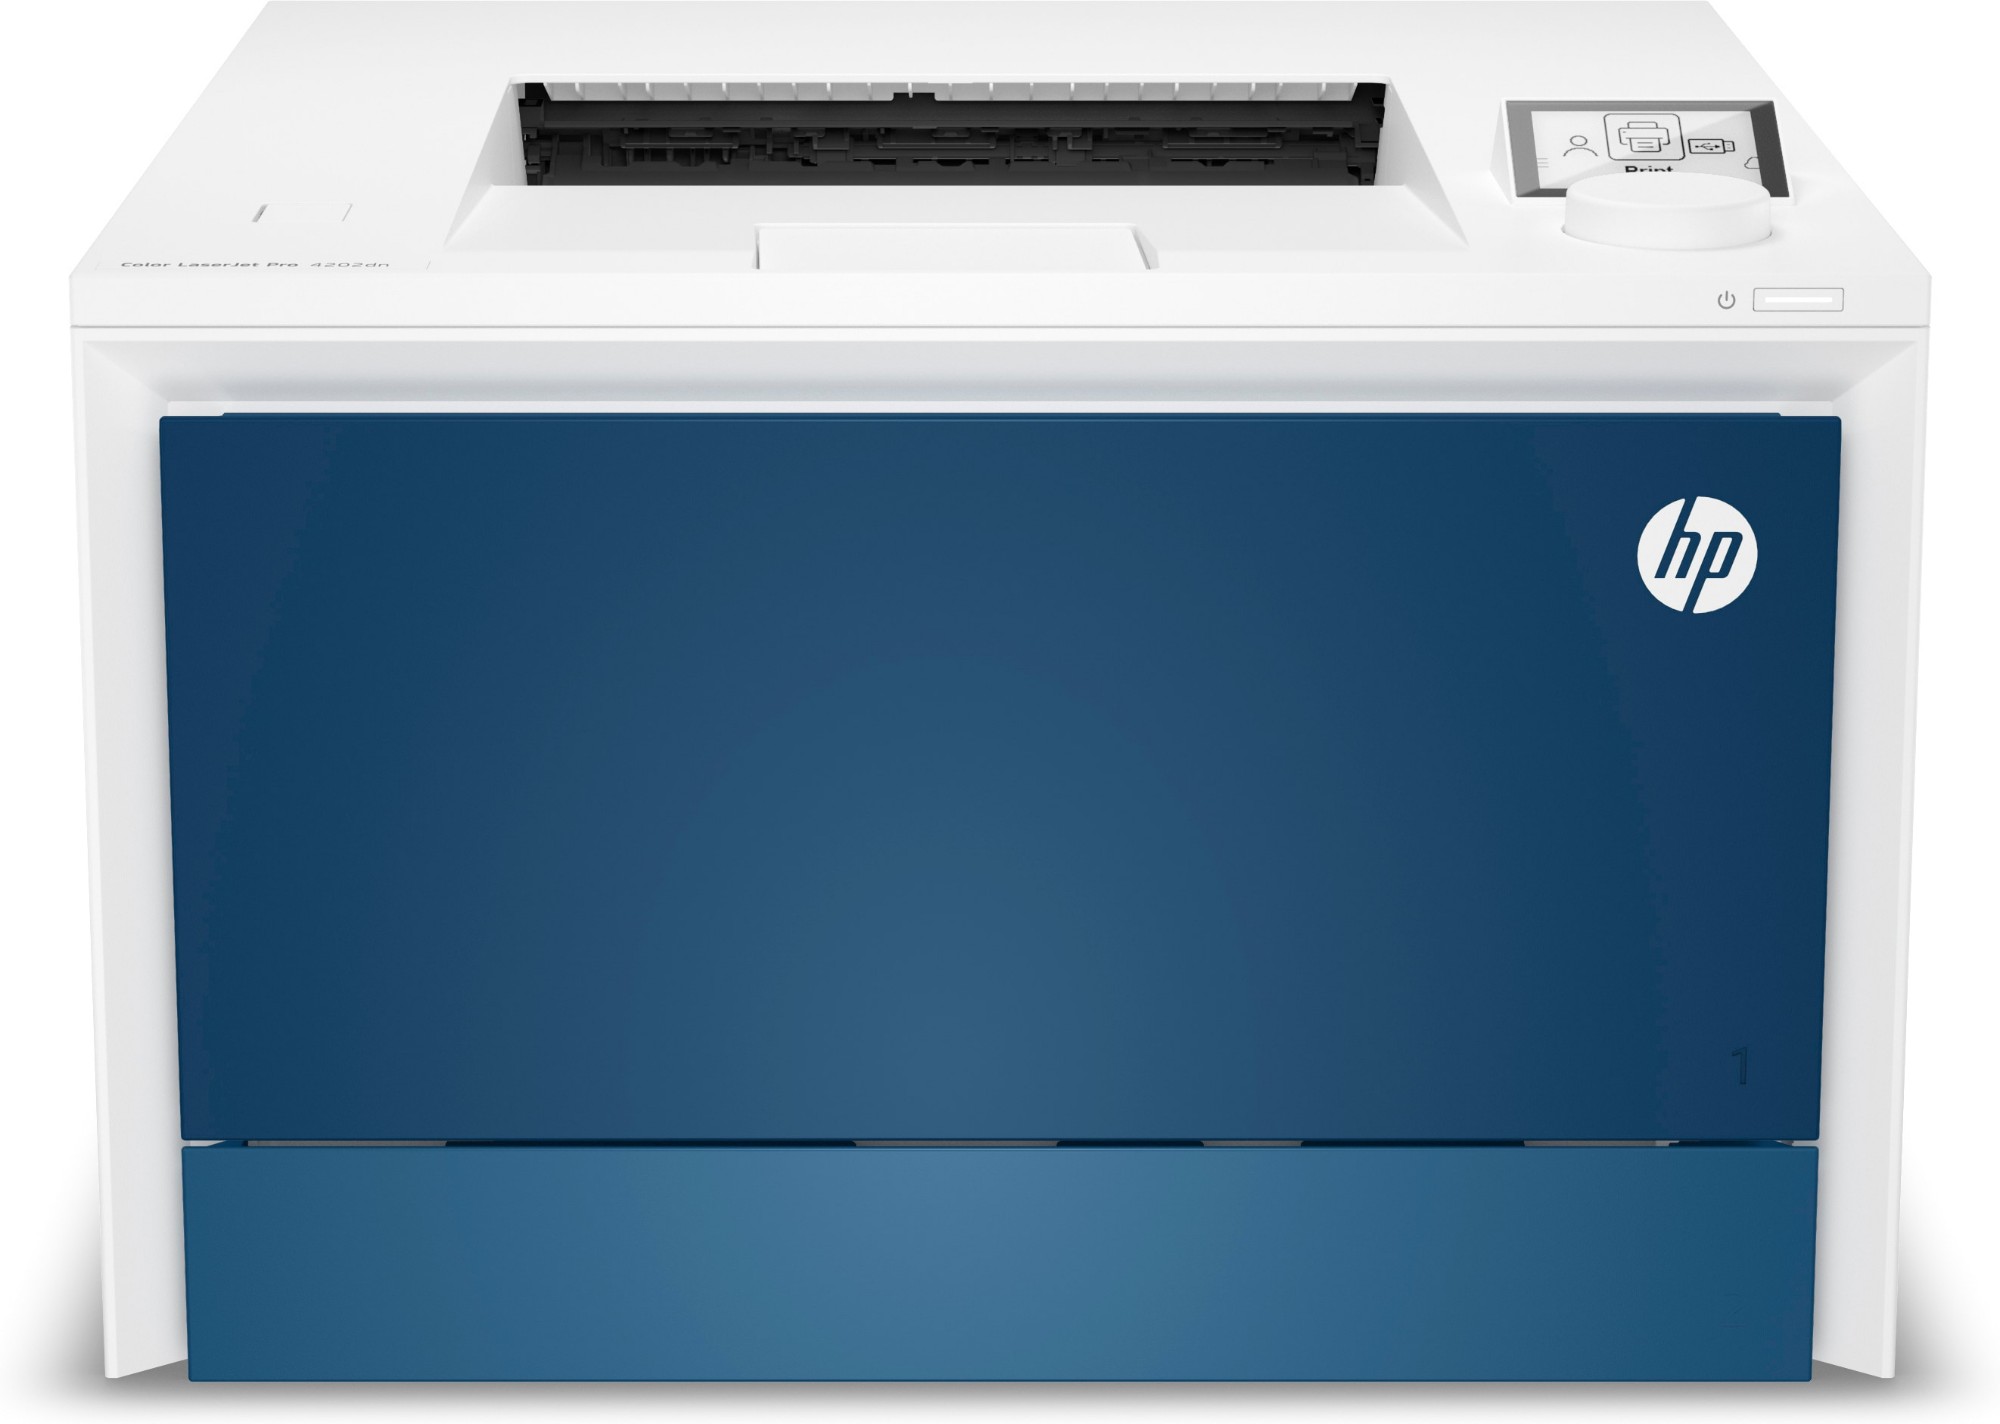 HP Colour LaserJet Pro 4202dn Printer, Colour, Printer for Small medium business, Print, Print from phone or tablet; Two-sided printing; Optional high-capacity trays